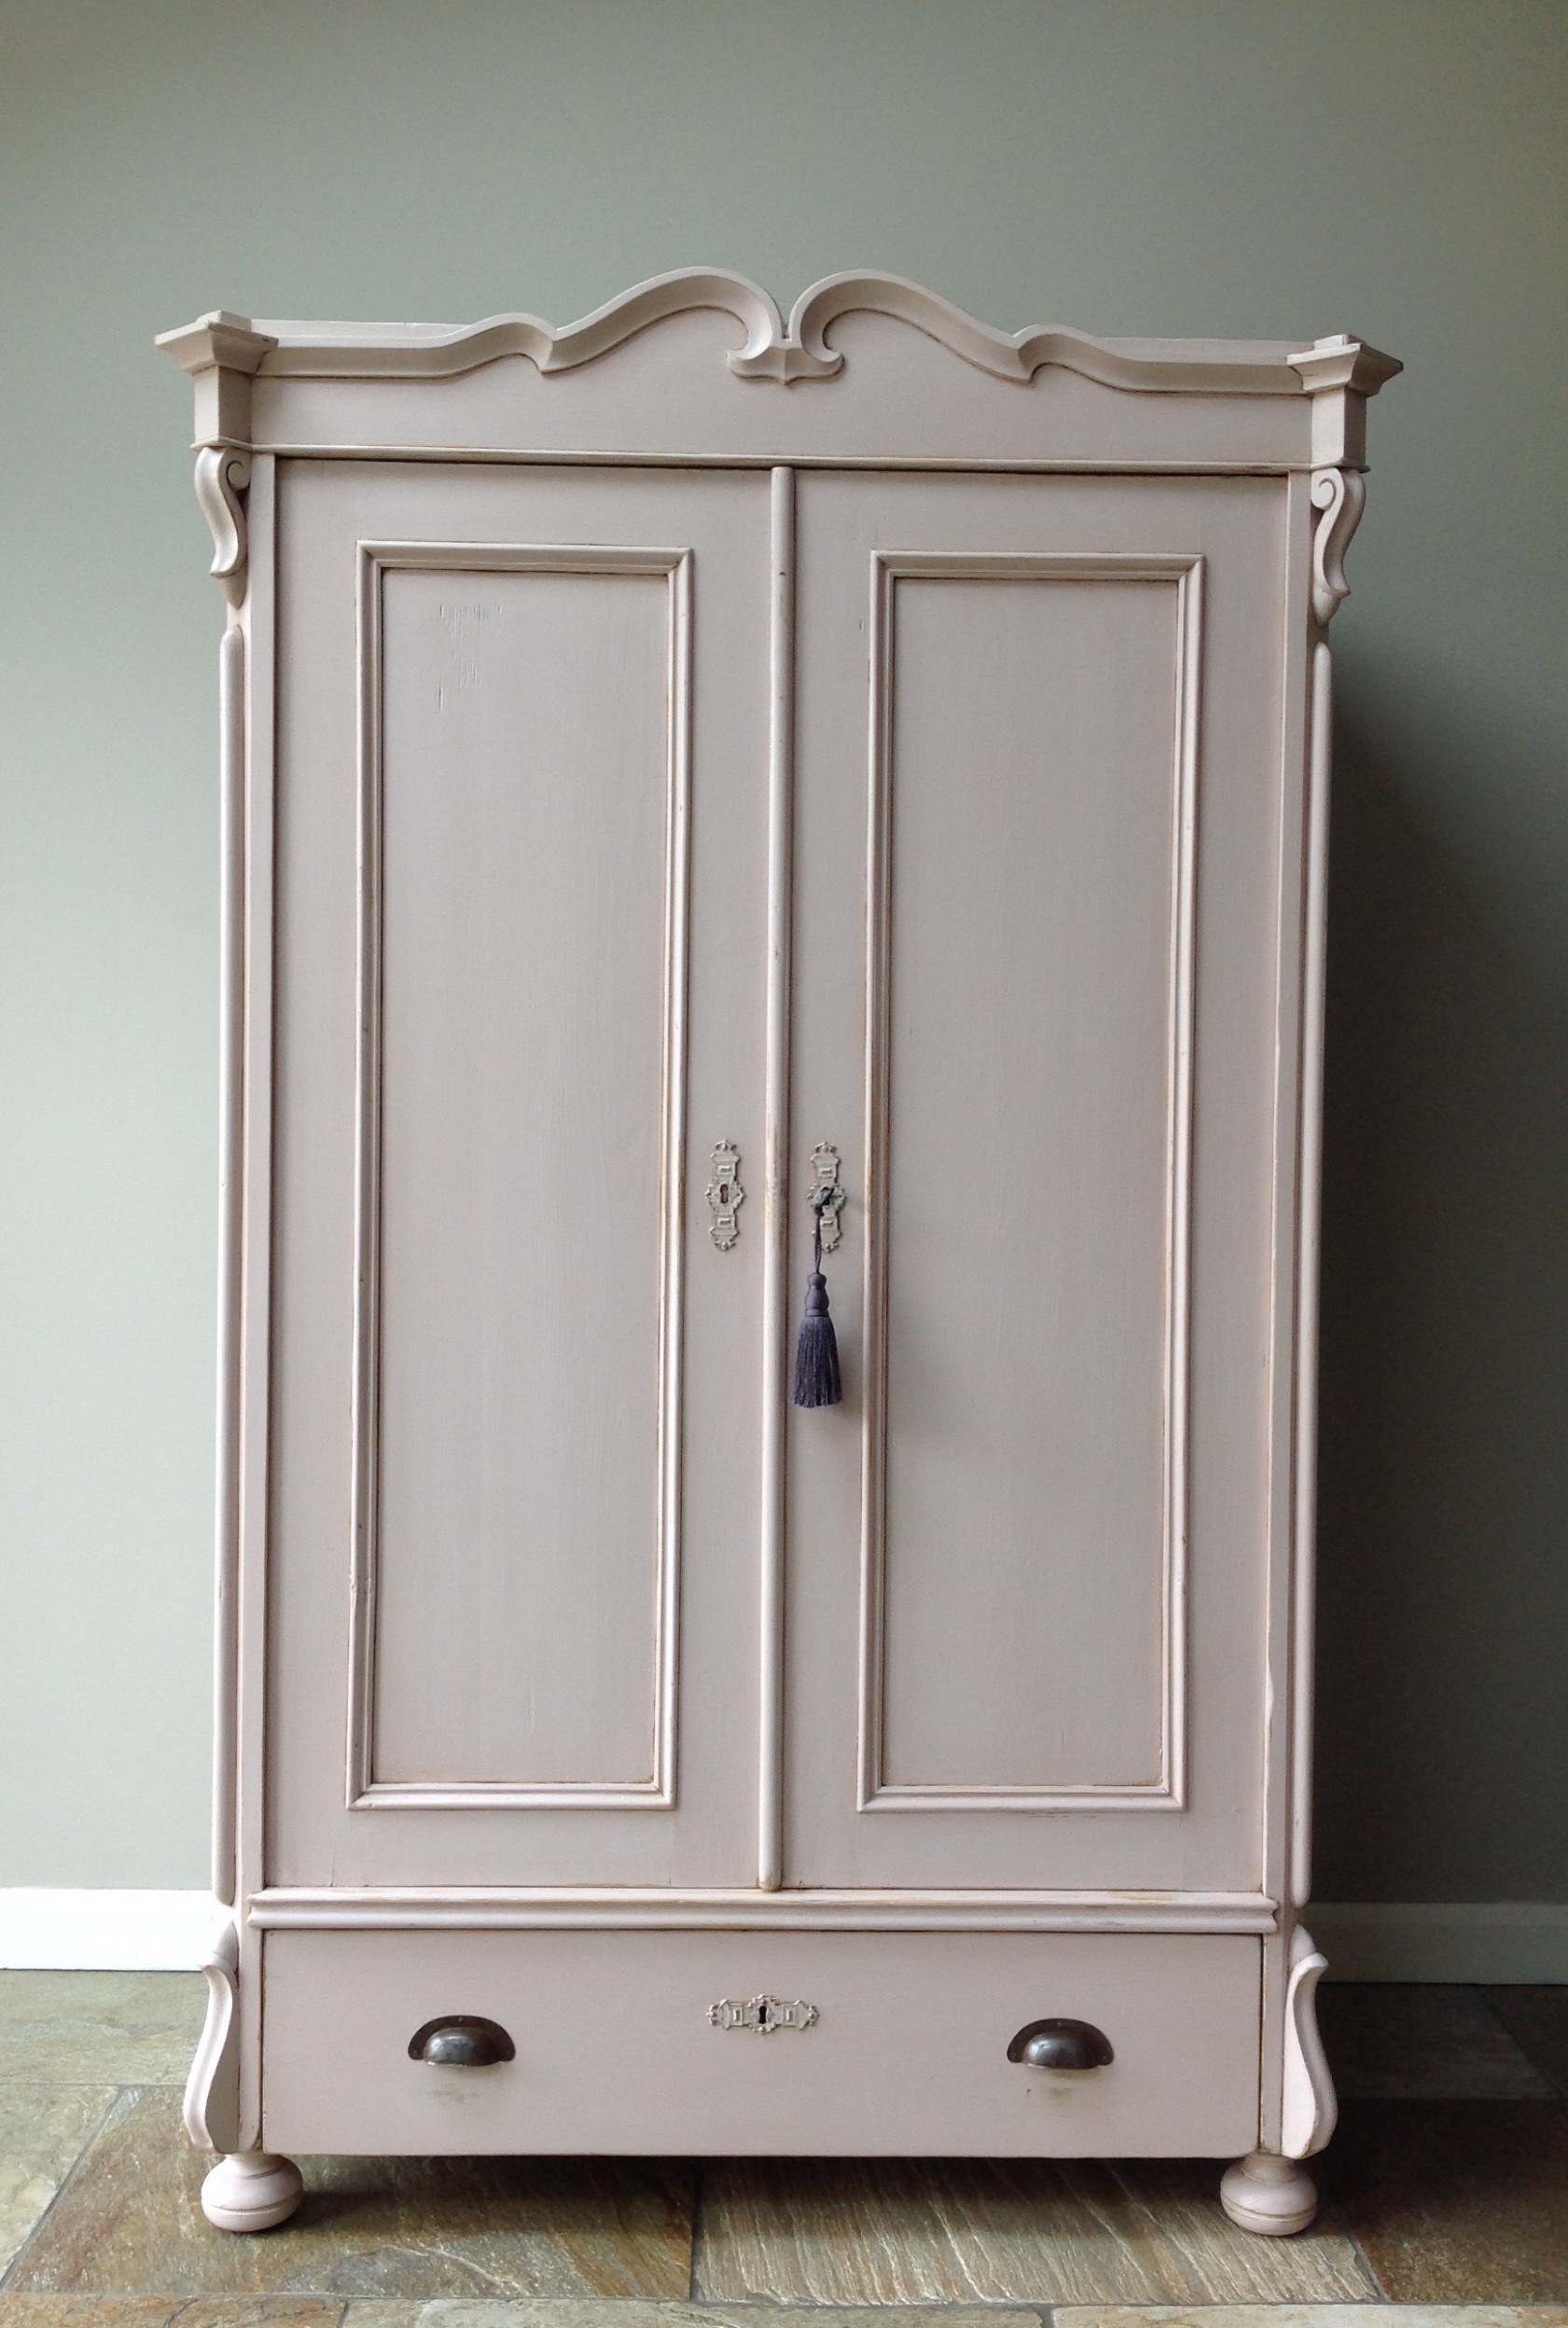 Antique Continental Hand Painted Blush Dusky Pink Pine Wardrobe Armoire Hall Cupboard Kids Annie Sloan Chalk Paint Antoinette Reers For Annie Sloan Chalk Paint